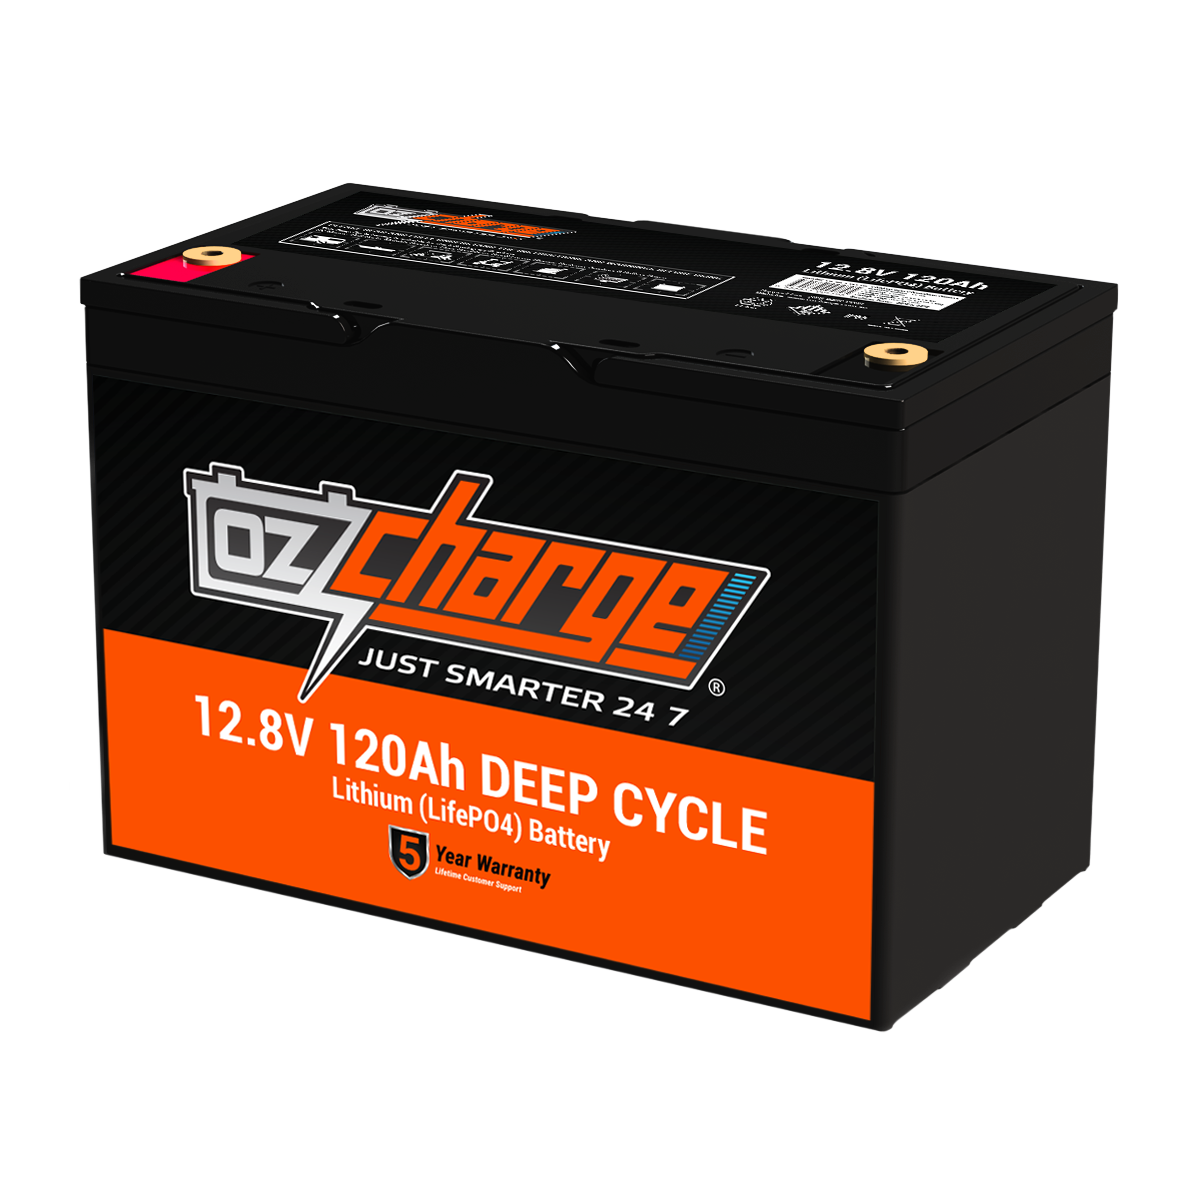 How to choose the correct type and size of Lithium Battery – OzCharge